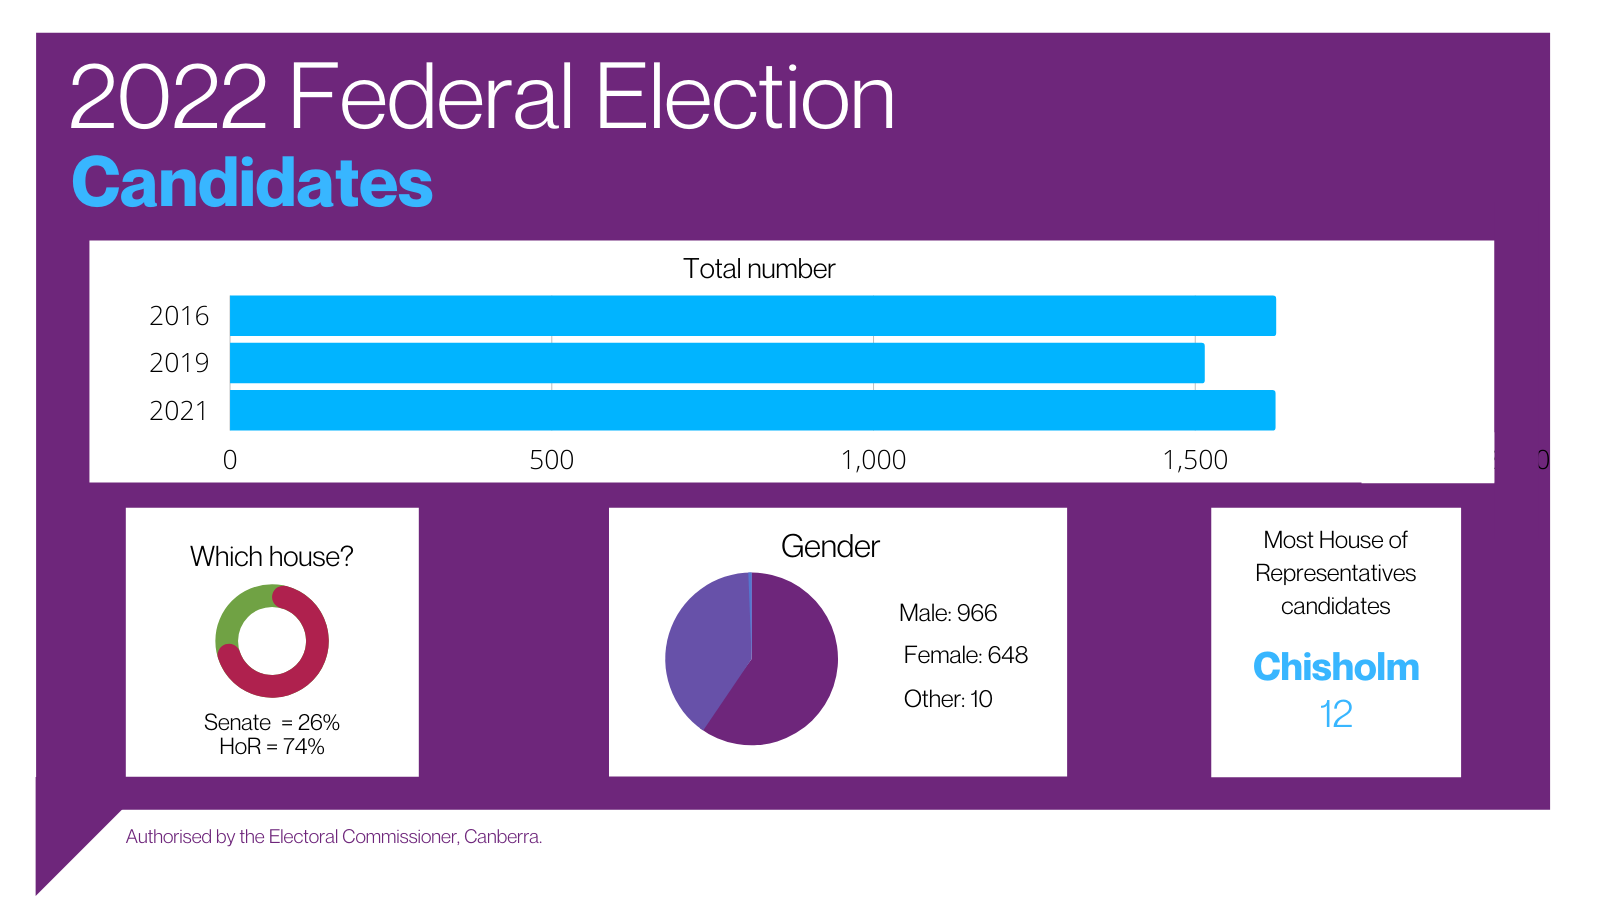 An image depicting federal election candidate statistics